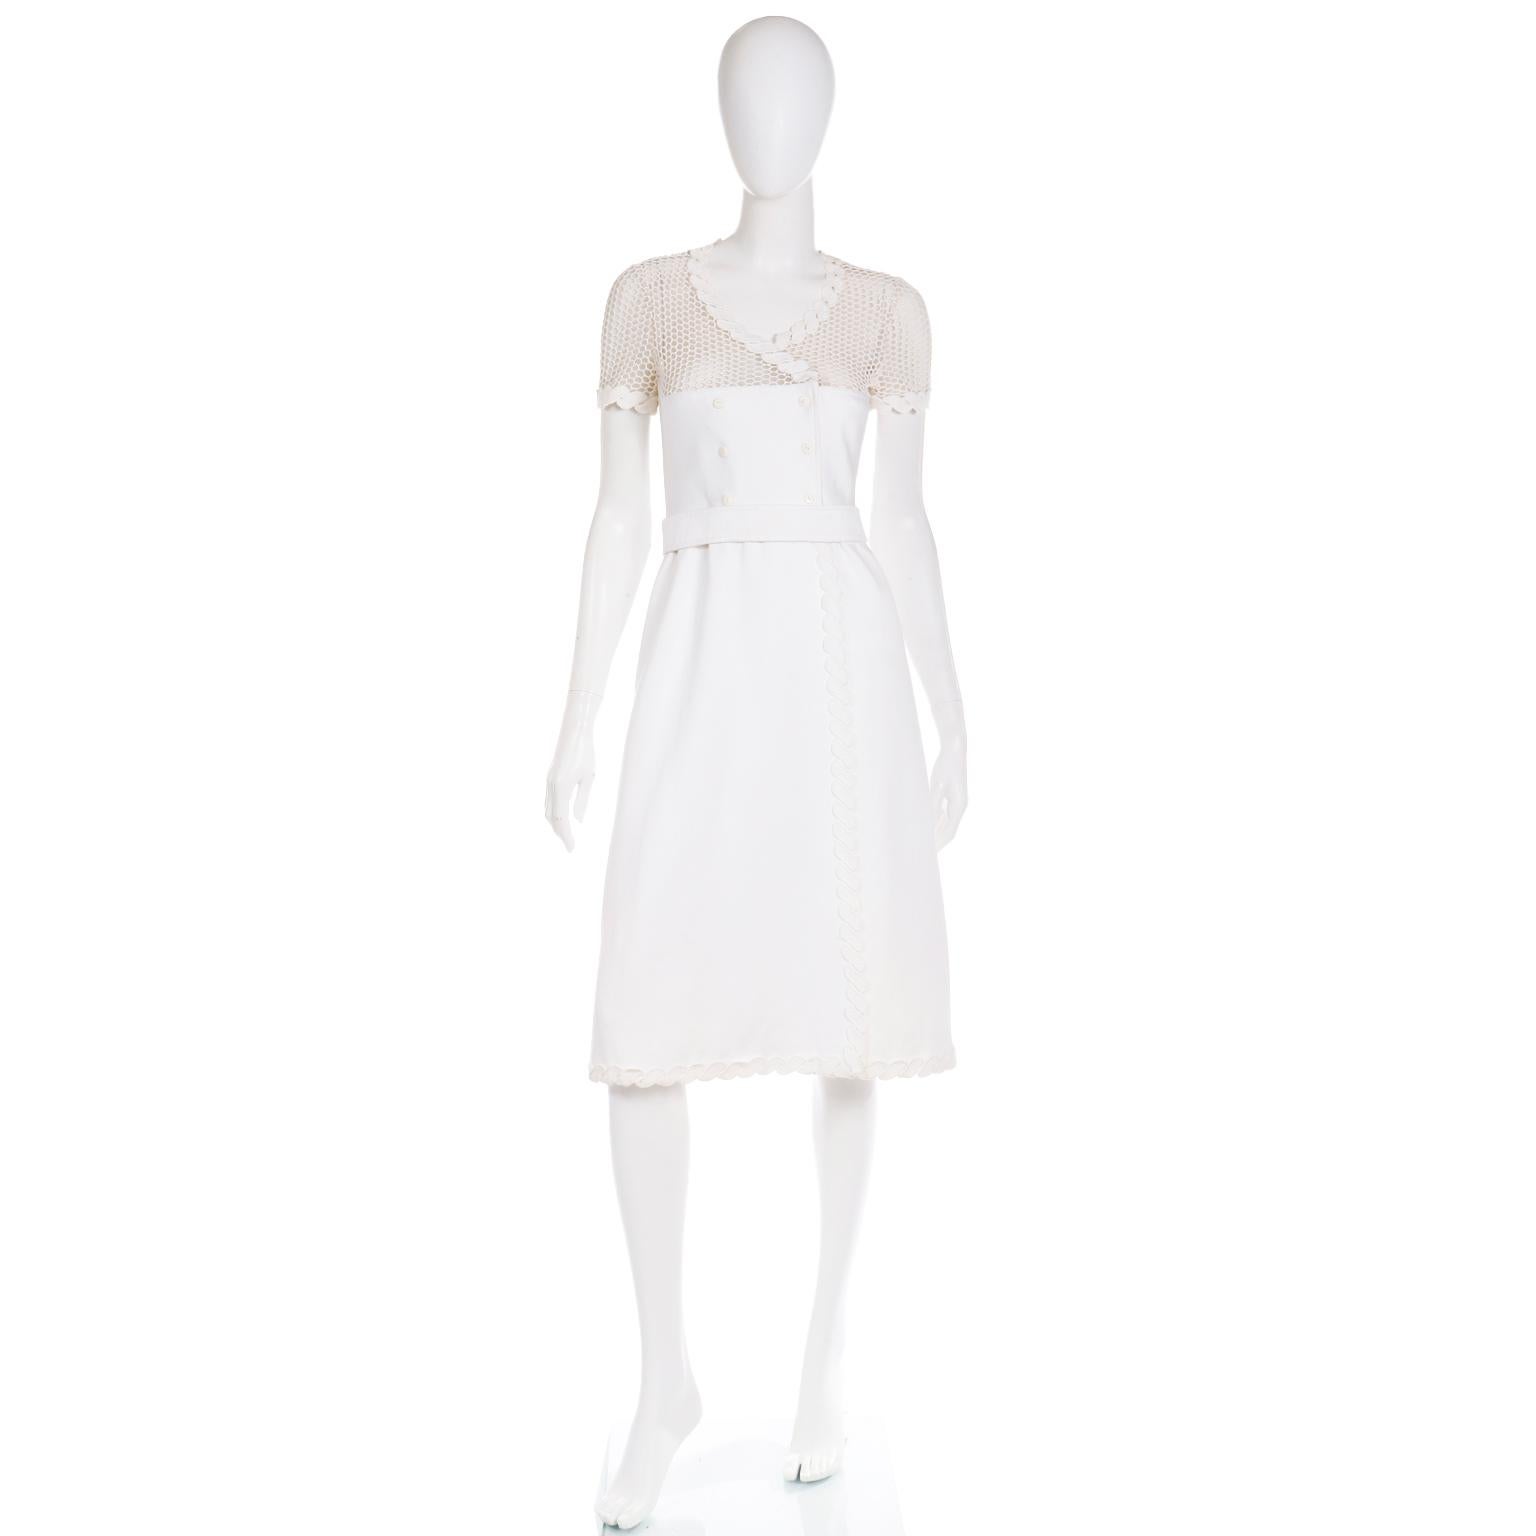 Gray Vintage 1960s Andre Courreges White Dress With Crochet Mesh & Belt For Sale